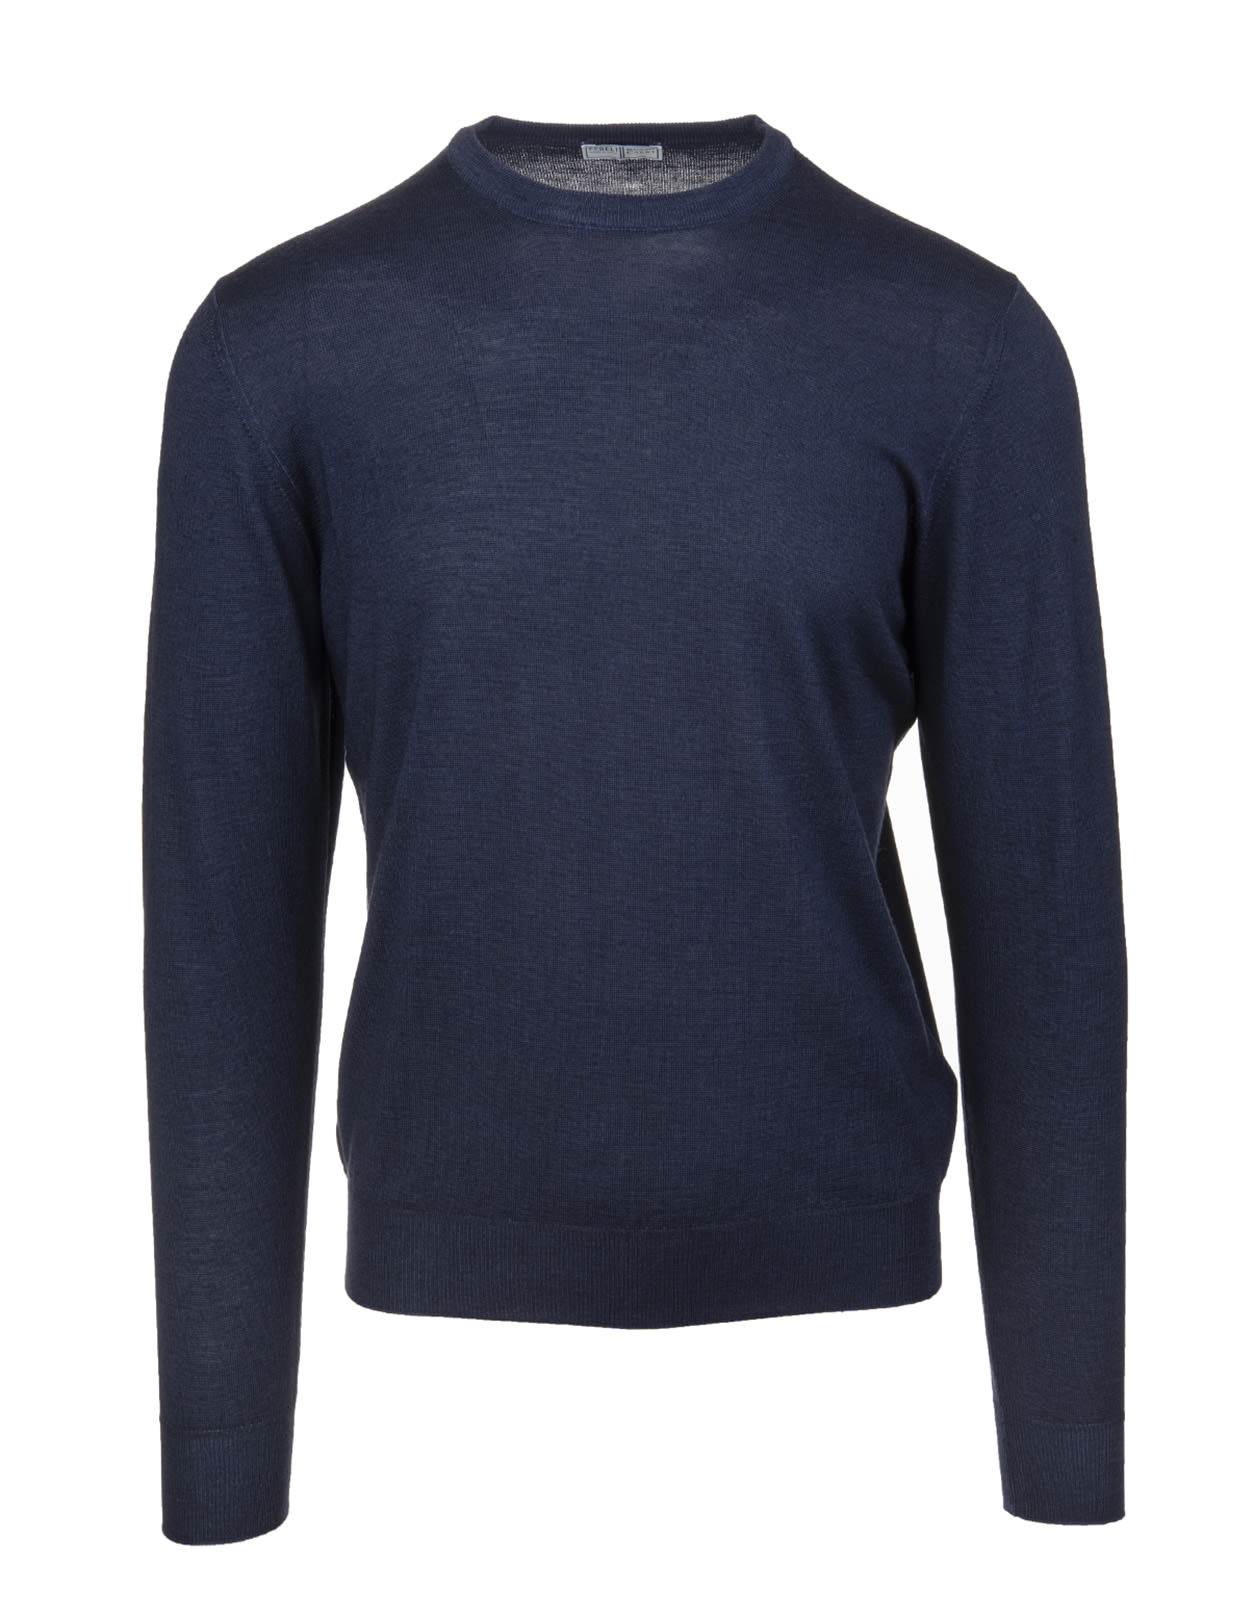 Fedeli Man Round Neck Pullover In Navy Blue Worsted Wool